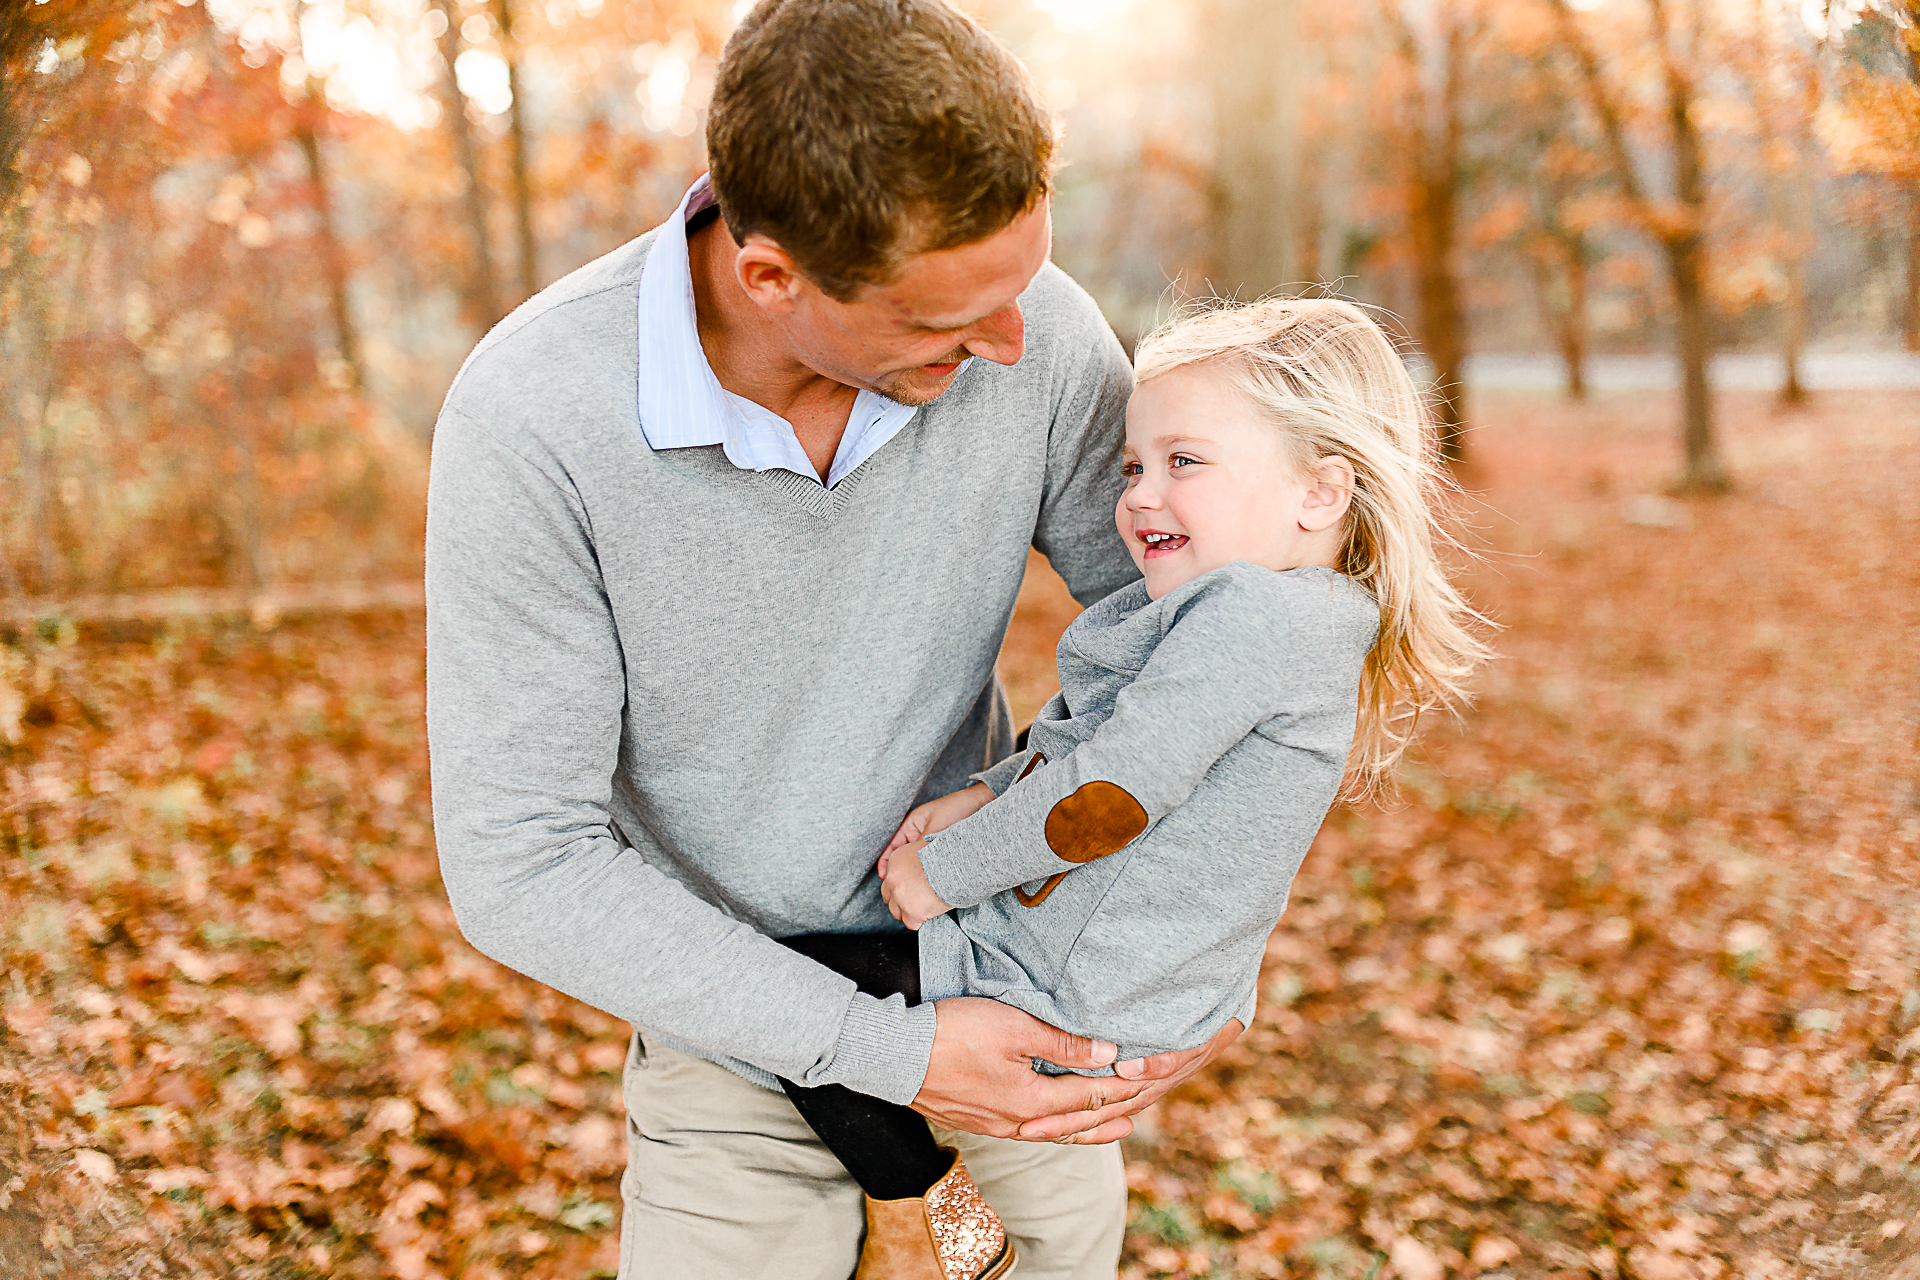 Photo by Norwell Photographer Christina Runnals | dad in an autumn forest spinning his daughter around